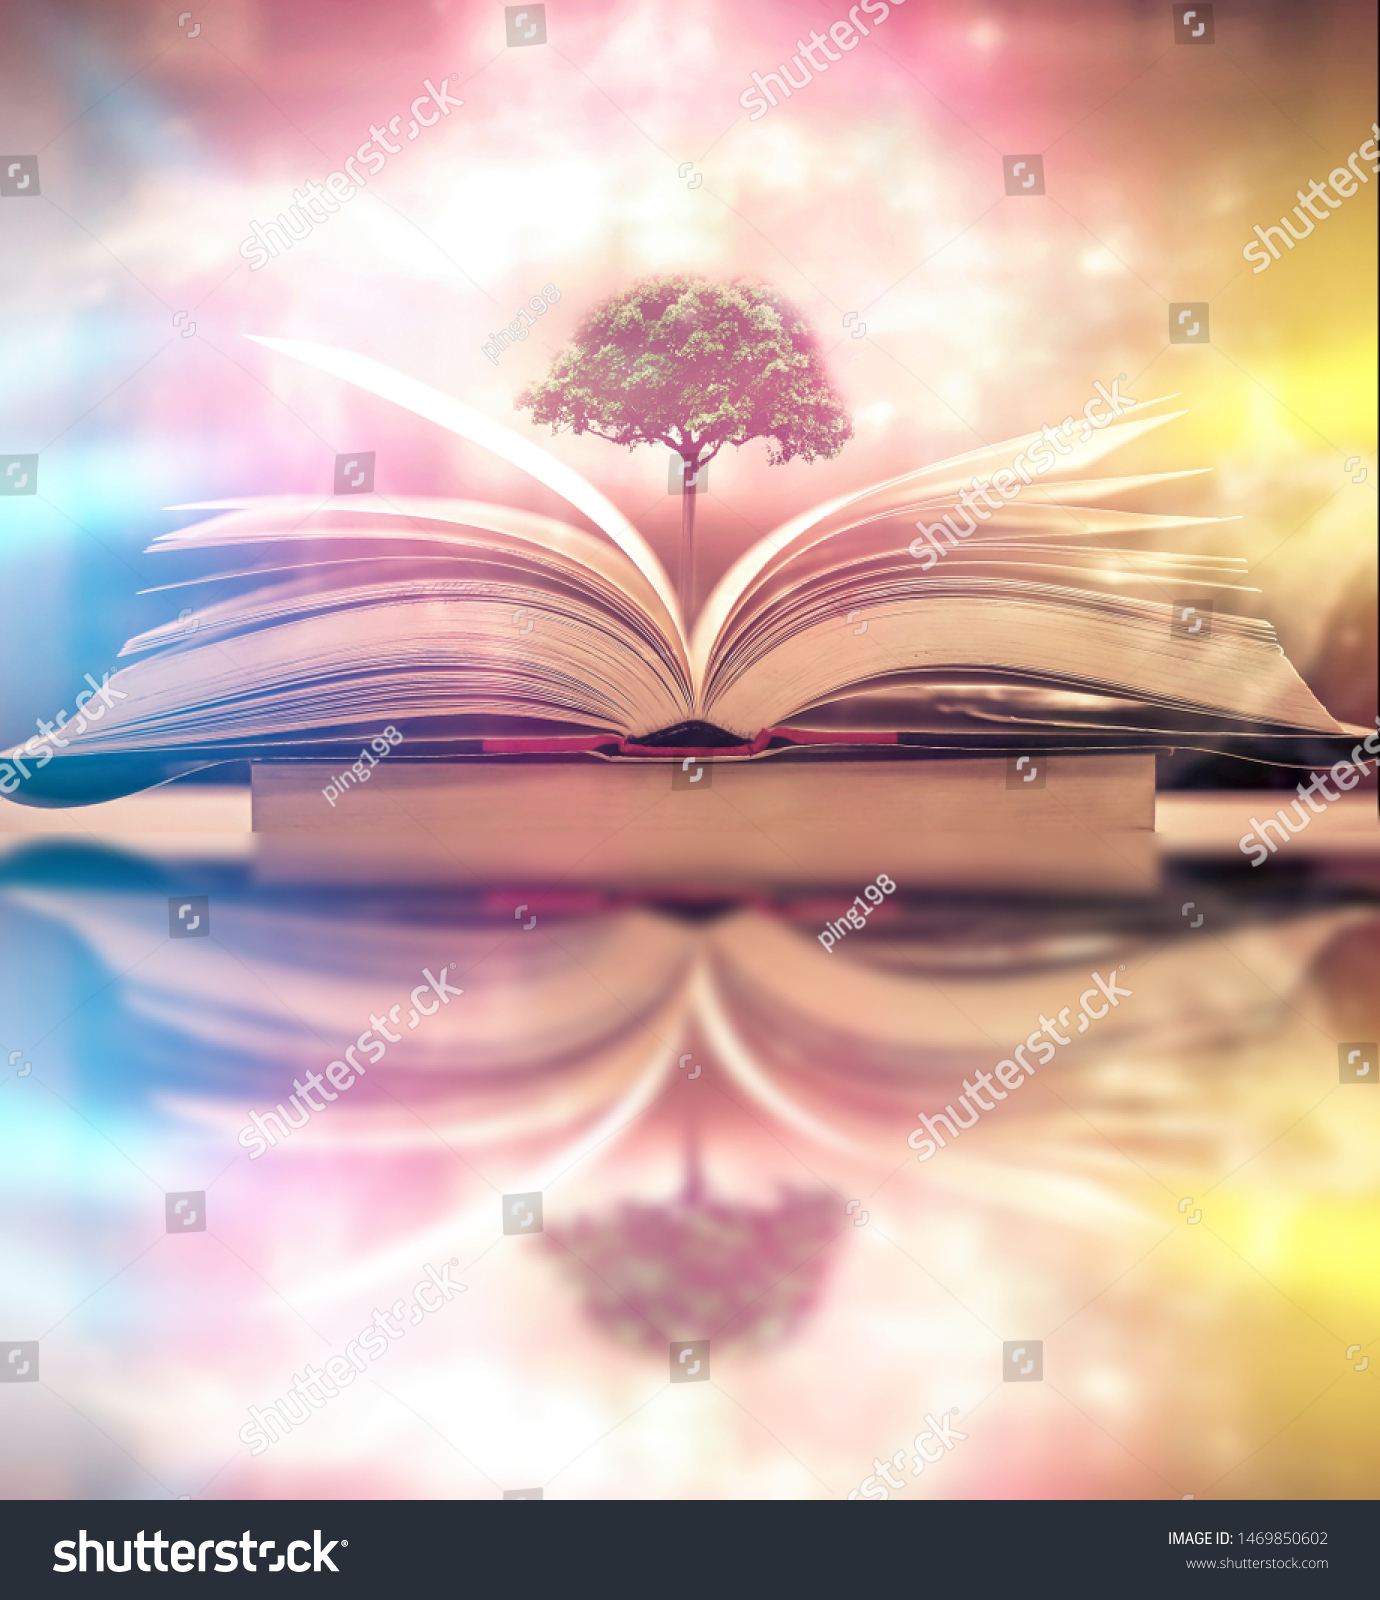 The concept of education by planting a tree of knowledge in the opening of an old book in the library and the magical magic of light that flies to the destination of success. Beautiful background #1469850602